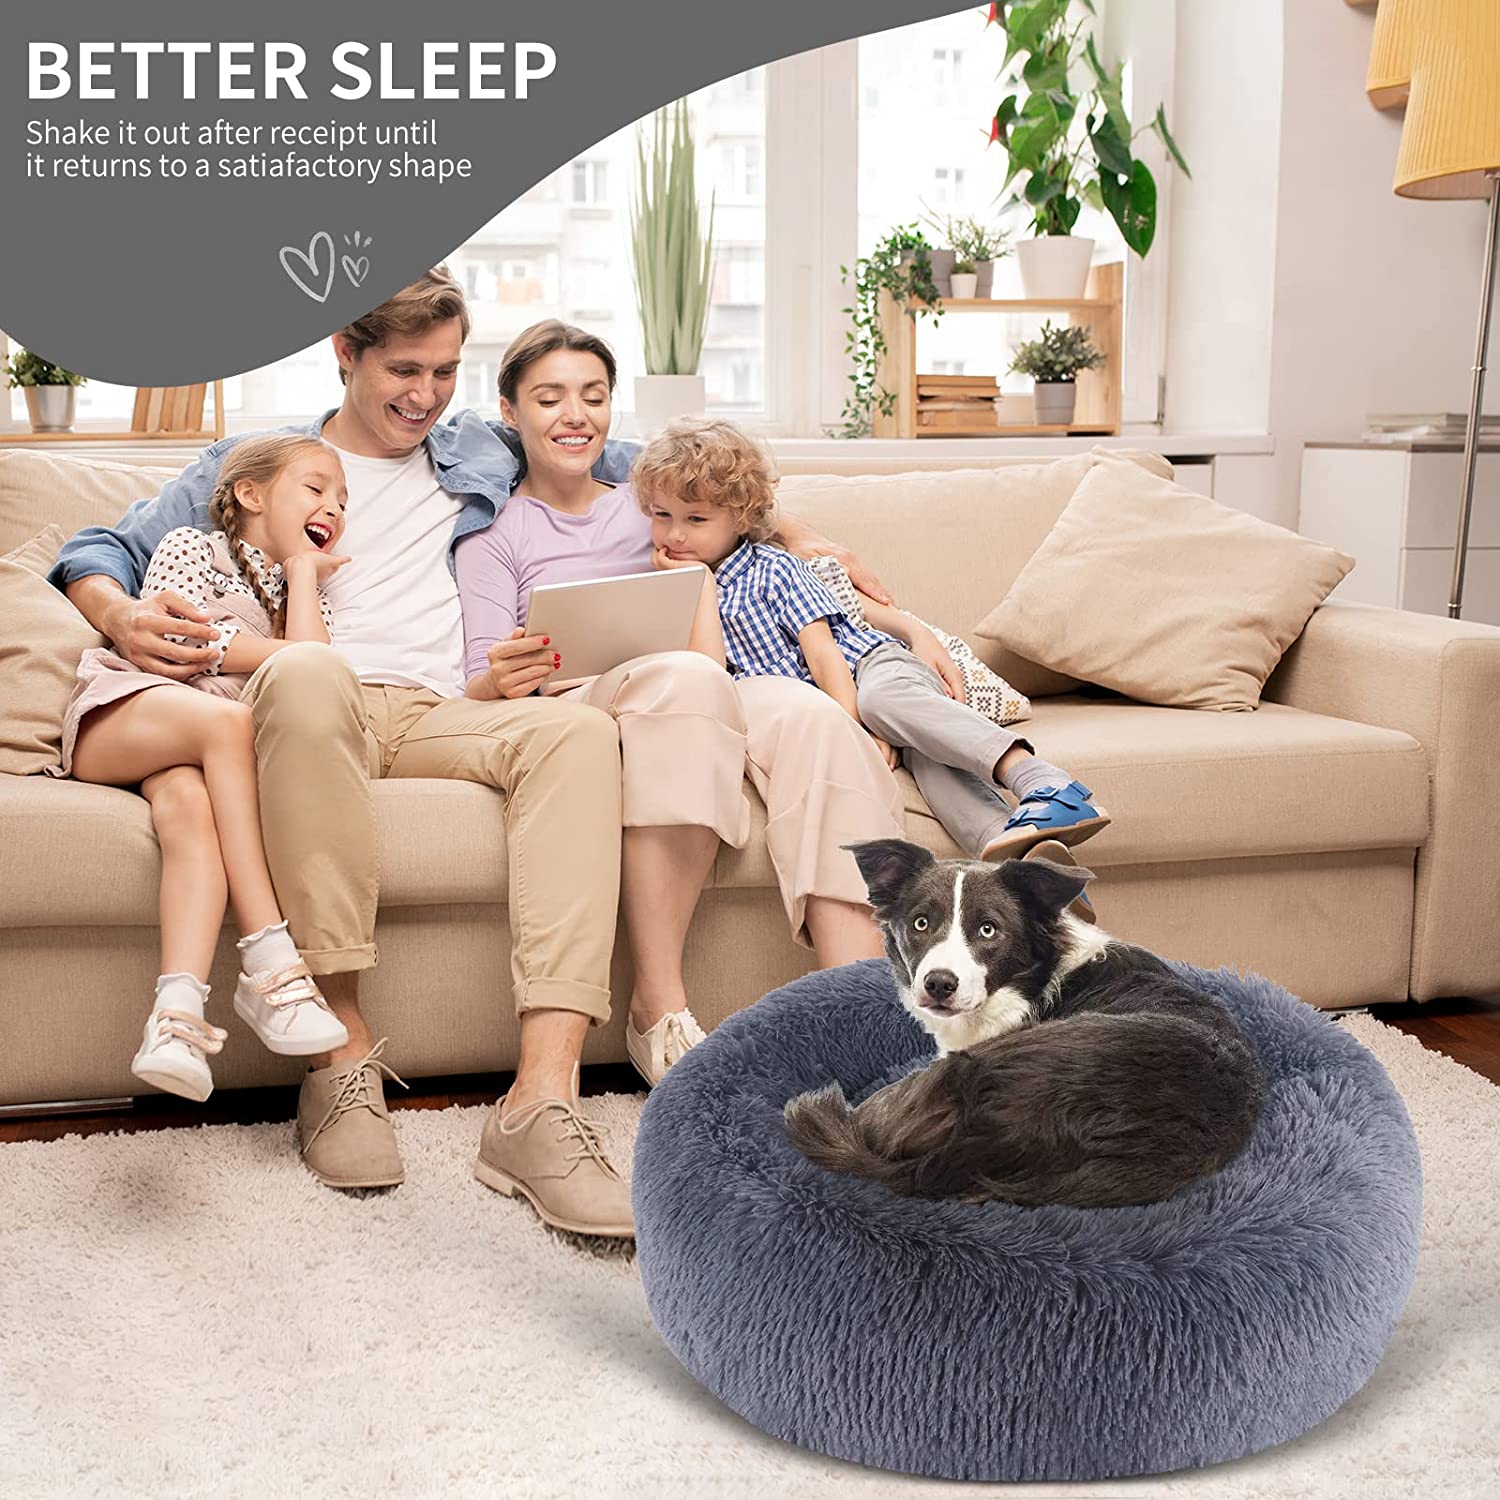 28 Inch Round Plush Pet Bed for Dogs & Cats, Fluffy Soft Warm Calming Dog Bed Cozy Faux Fur Dog Bed Sleeping Kennel Nest, Dark Grey - image 5 of 9